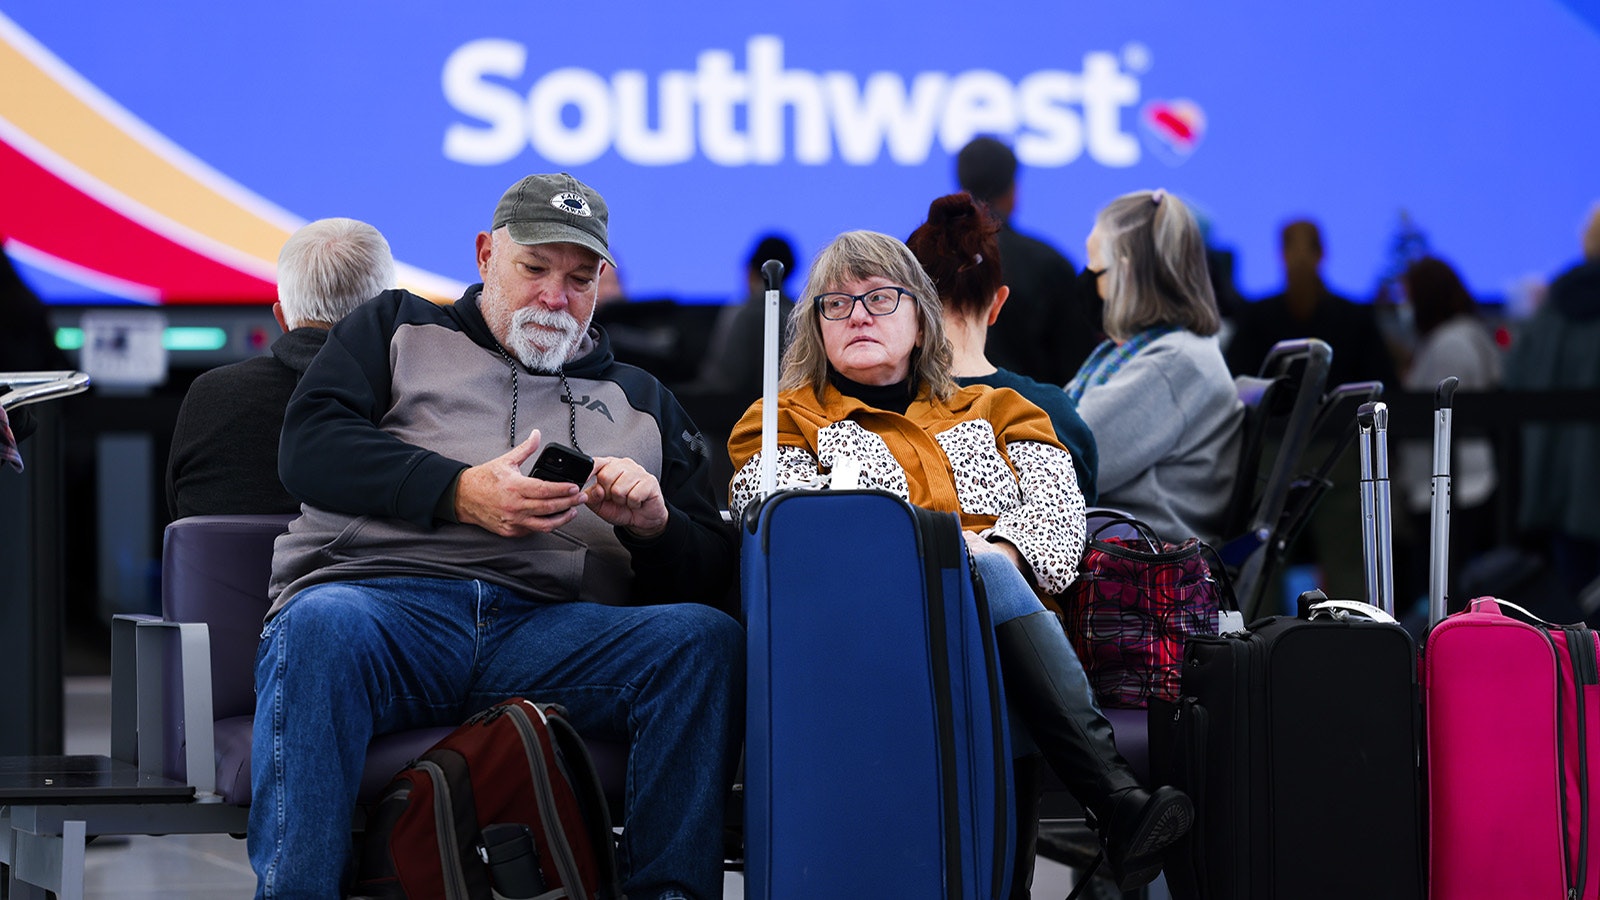 Southwest cancellations 12 28 22